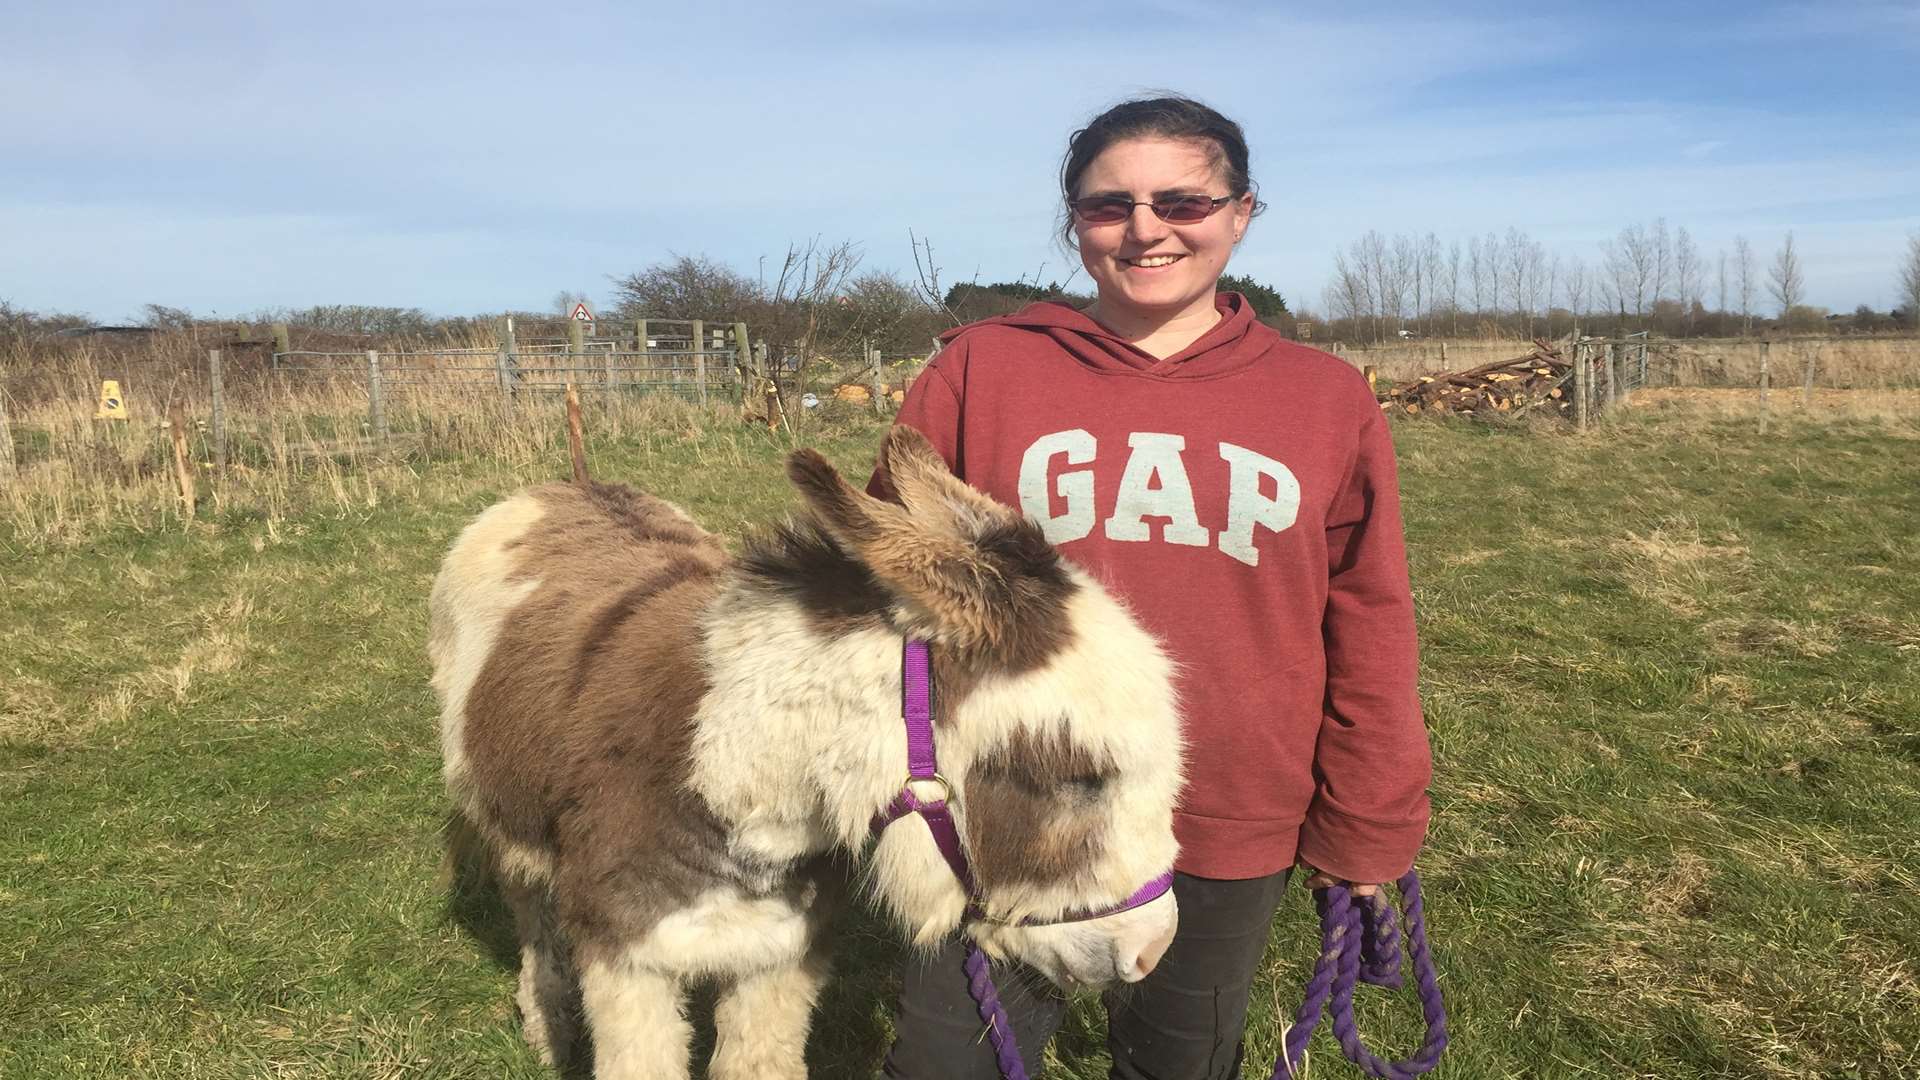 Charity Weatherall with her donkey Friday